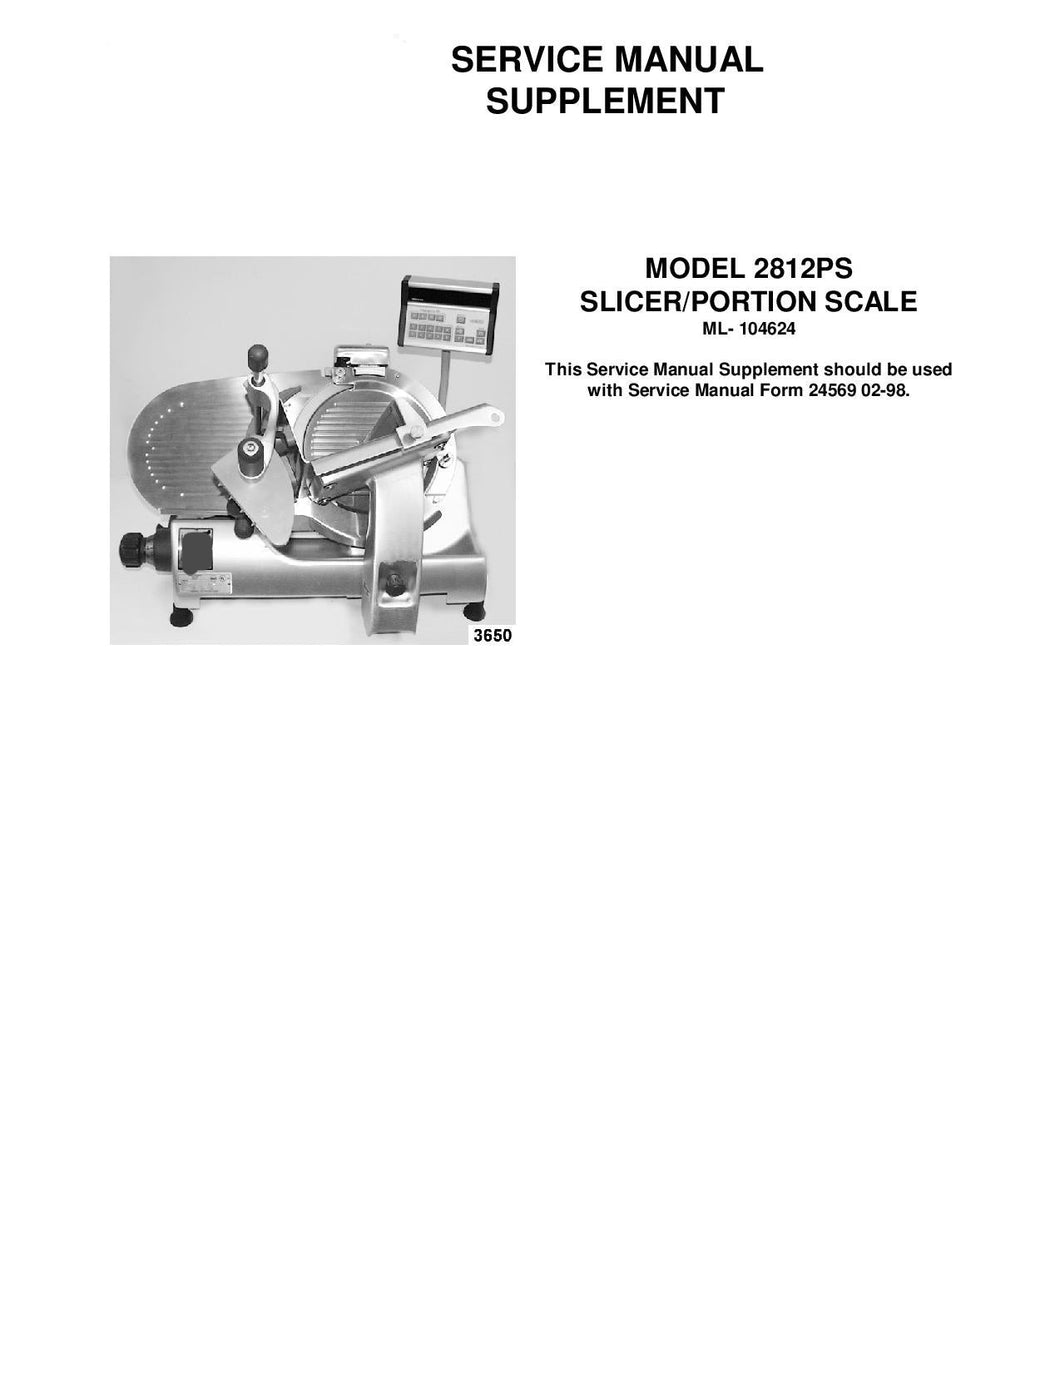 HOBART MODEL 2812PS SLICER/PORTION SCALE SERVICE, TECHNICAL AND REPAIR MANUALS PDF